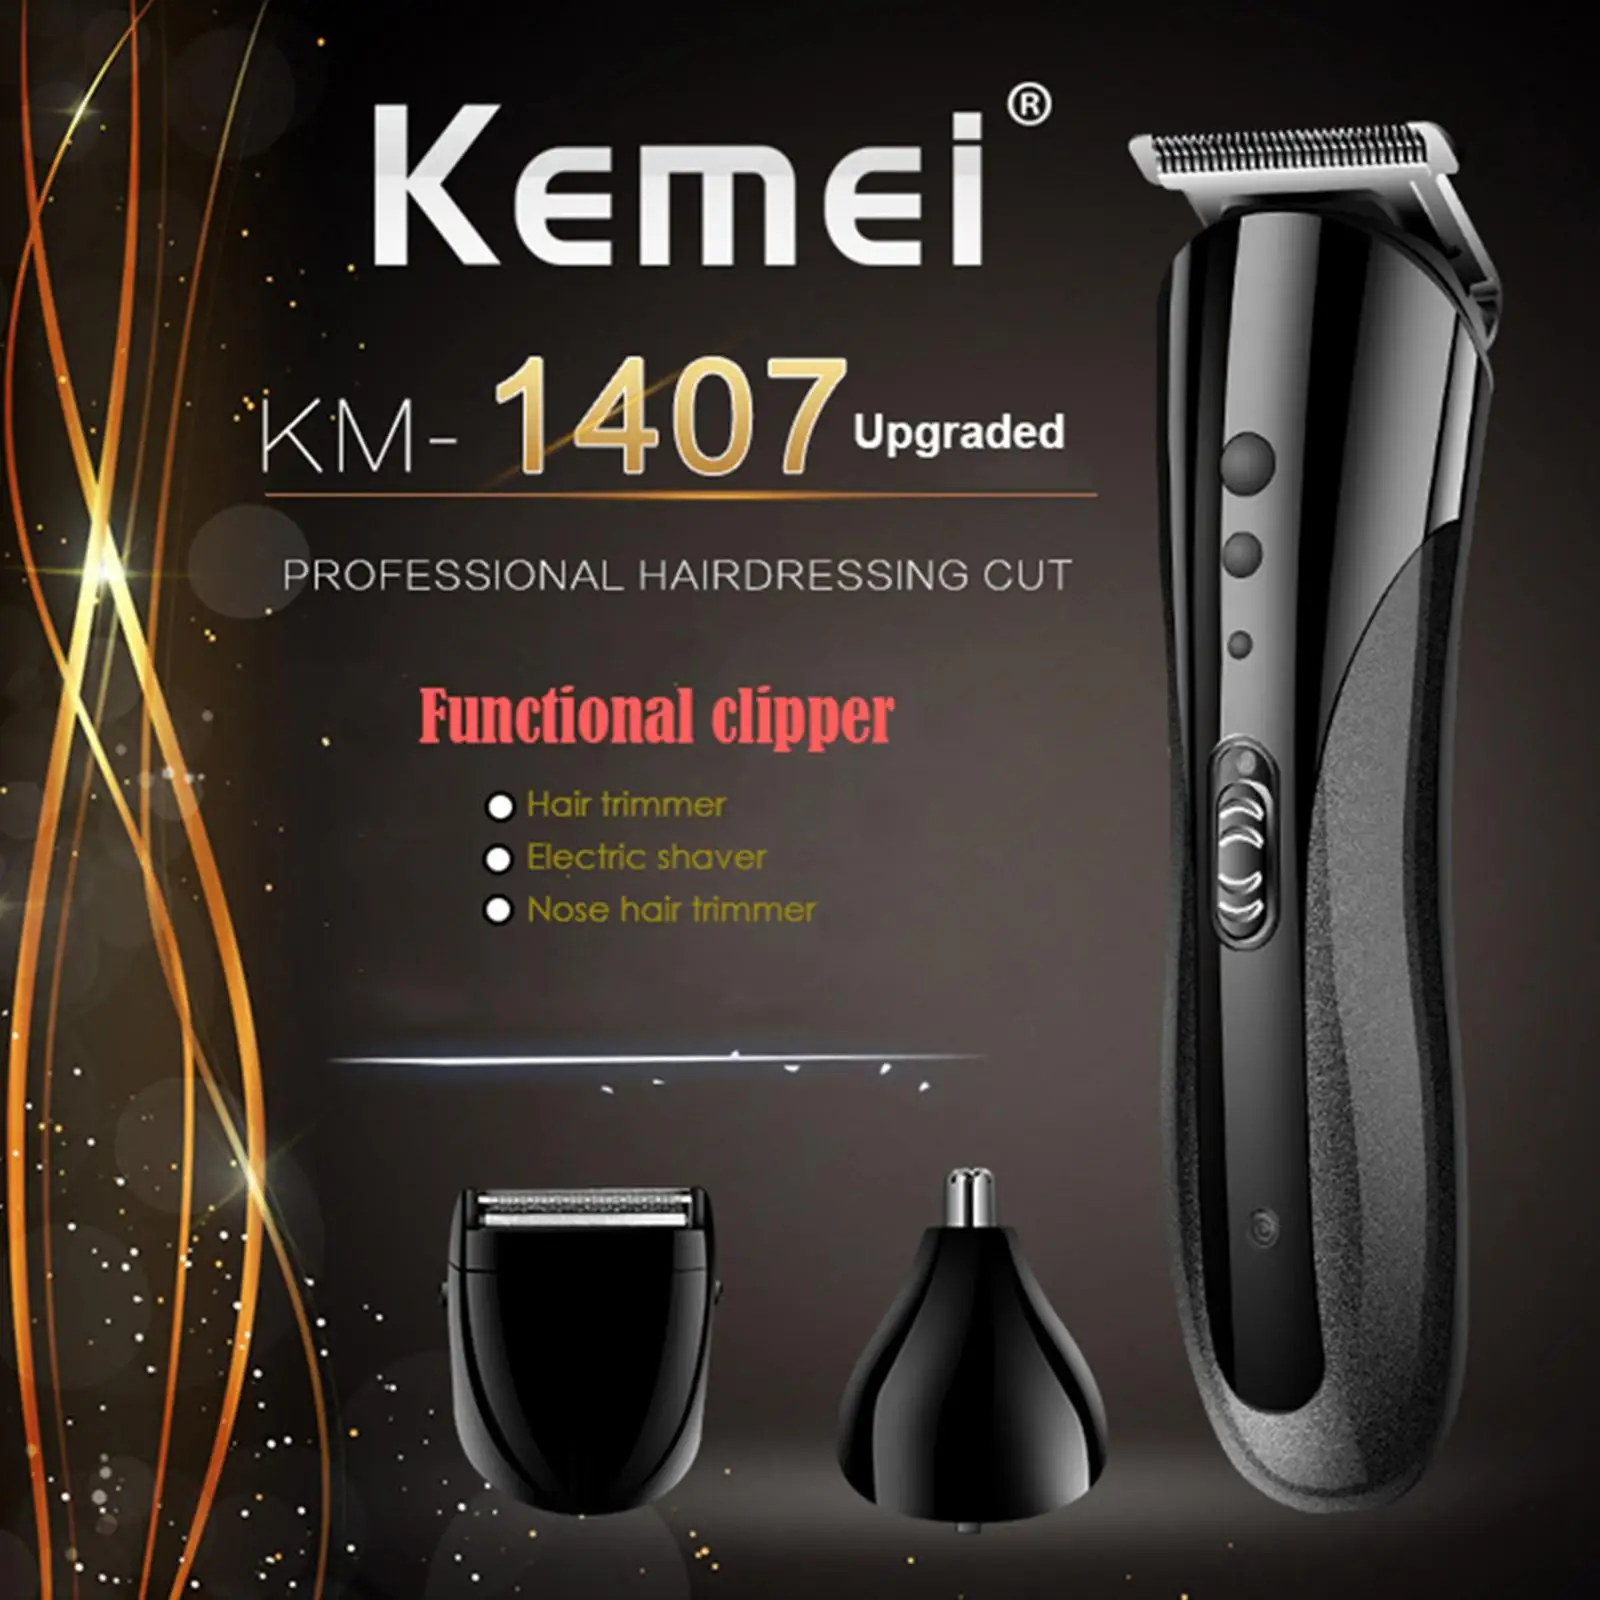 Hair Clippers Trimmer USB Charging Carbon Steel Blades Hair Cutting Hair  Grooming Kit Barber Tool Men Gifts EU